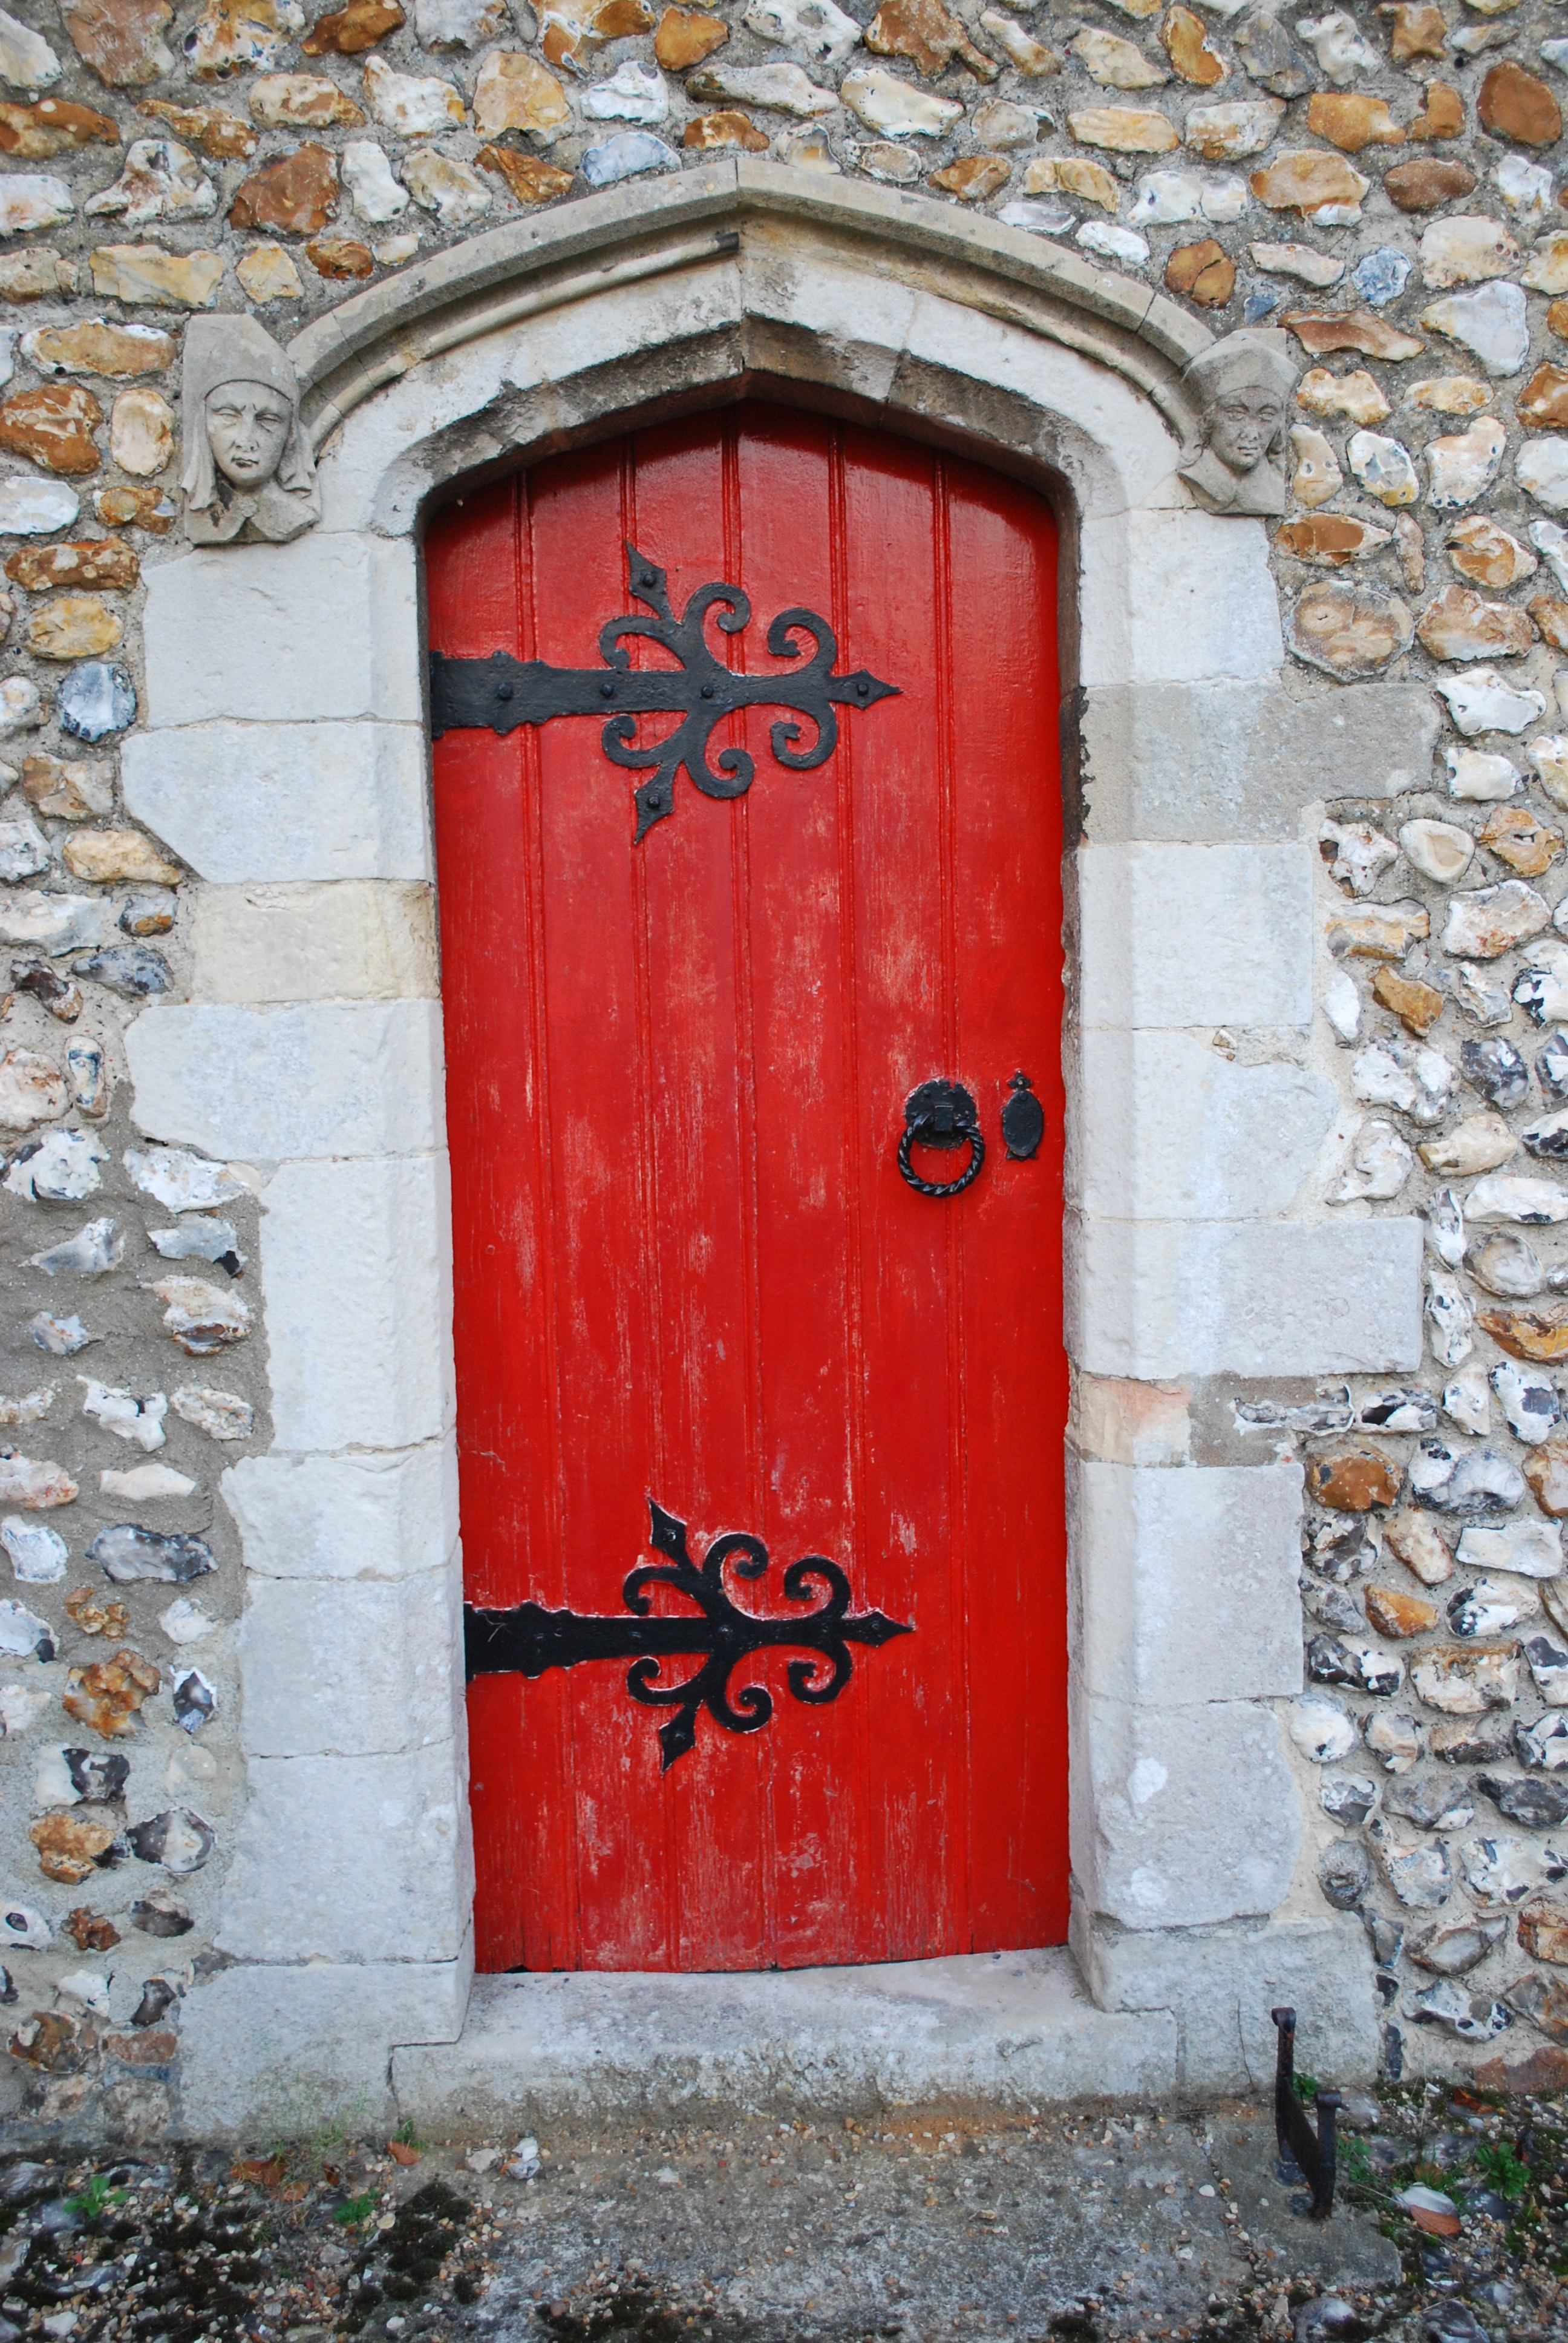 Church, Old, Door, Red, Entrance, architecture, red